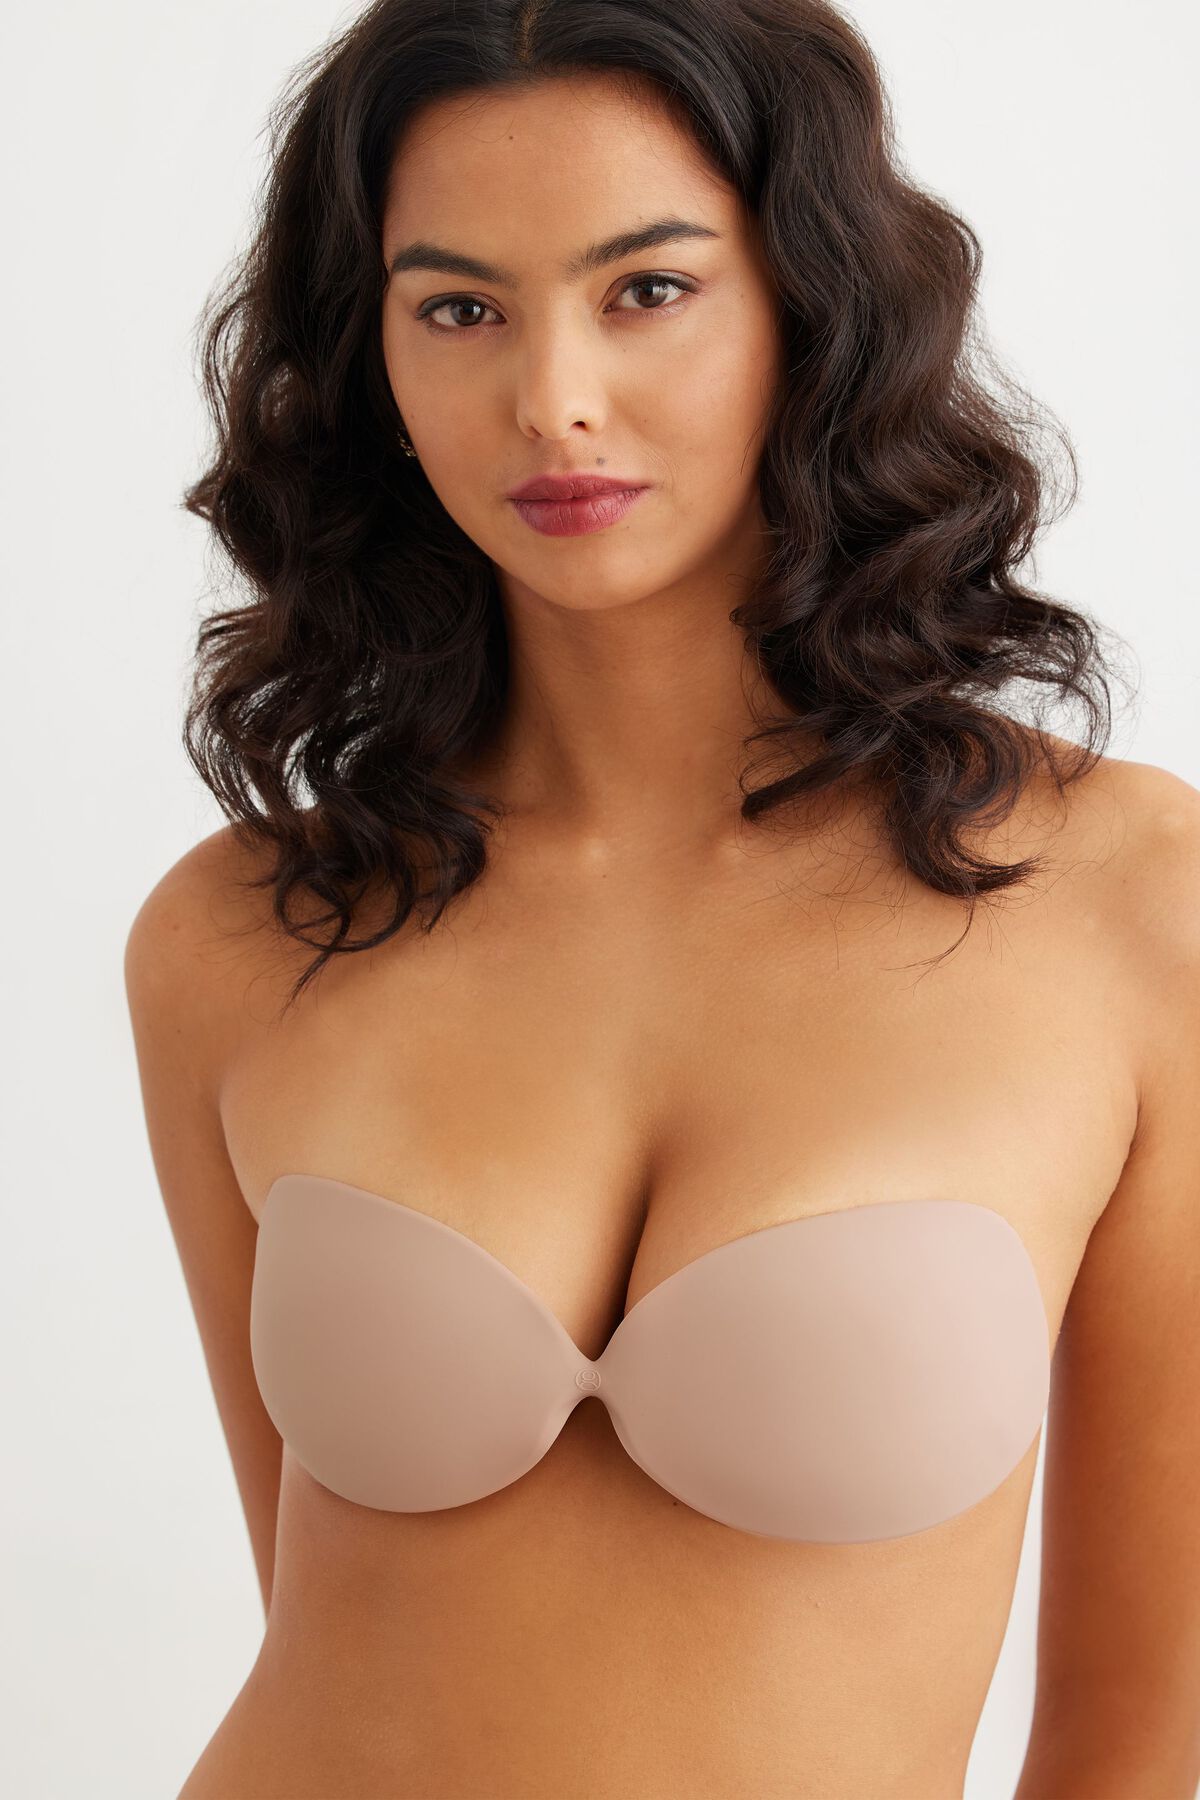 Gatherall Strapless Bra Review and How To 